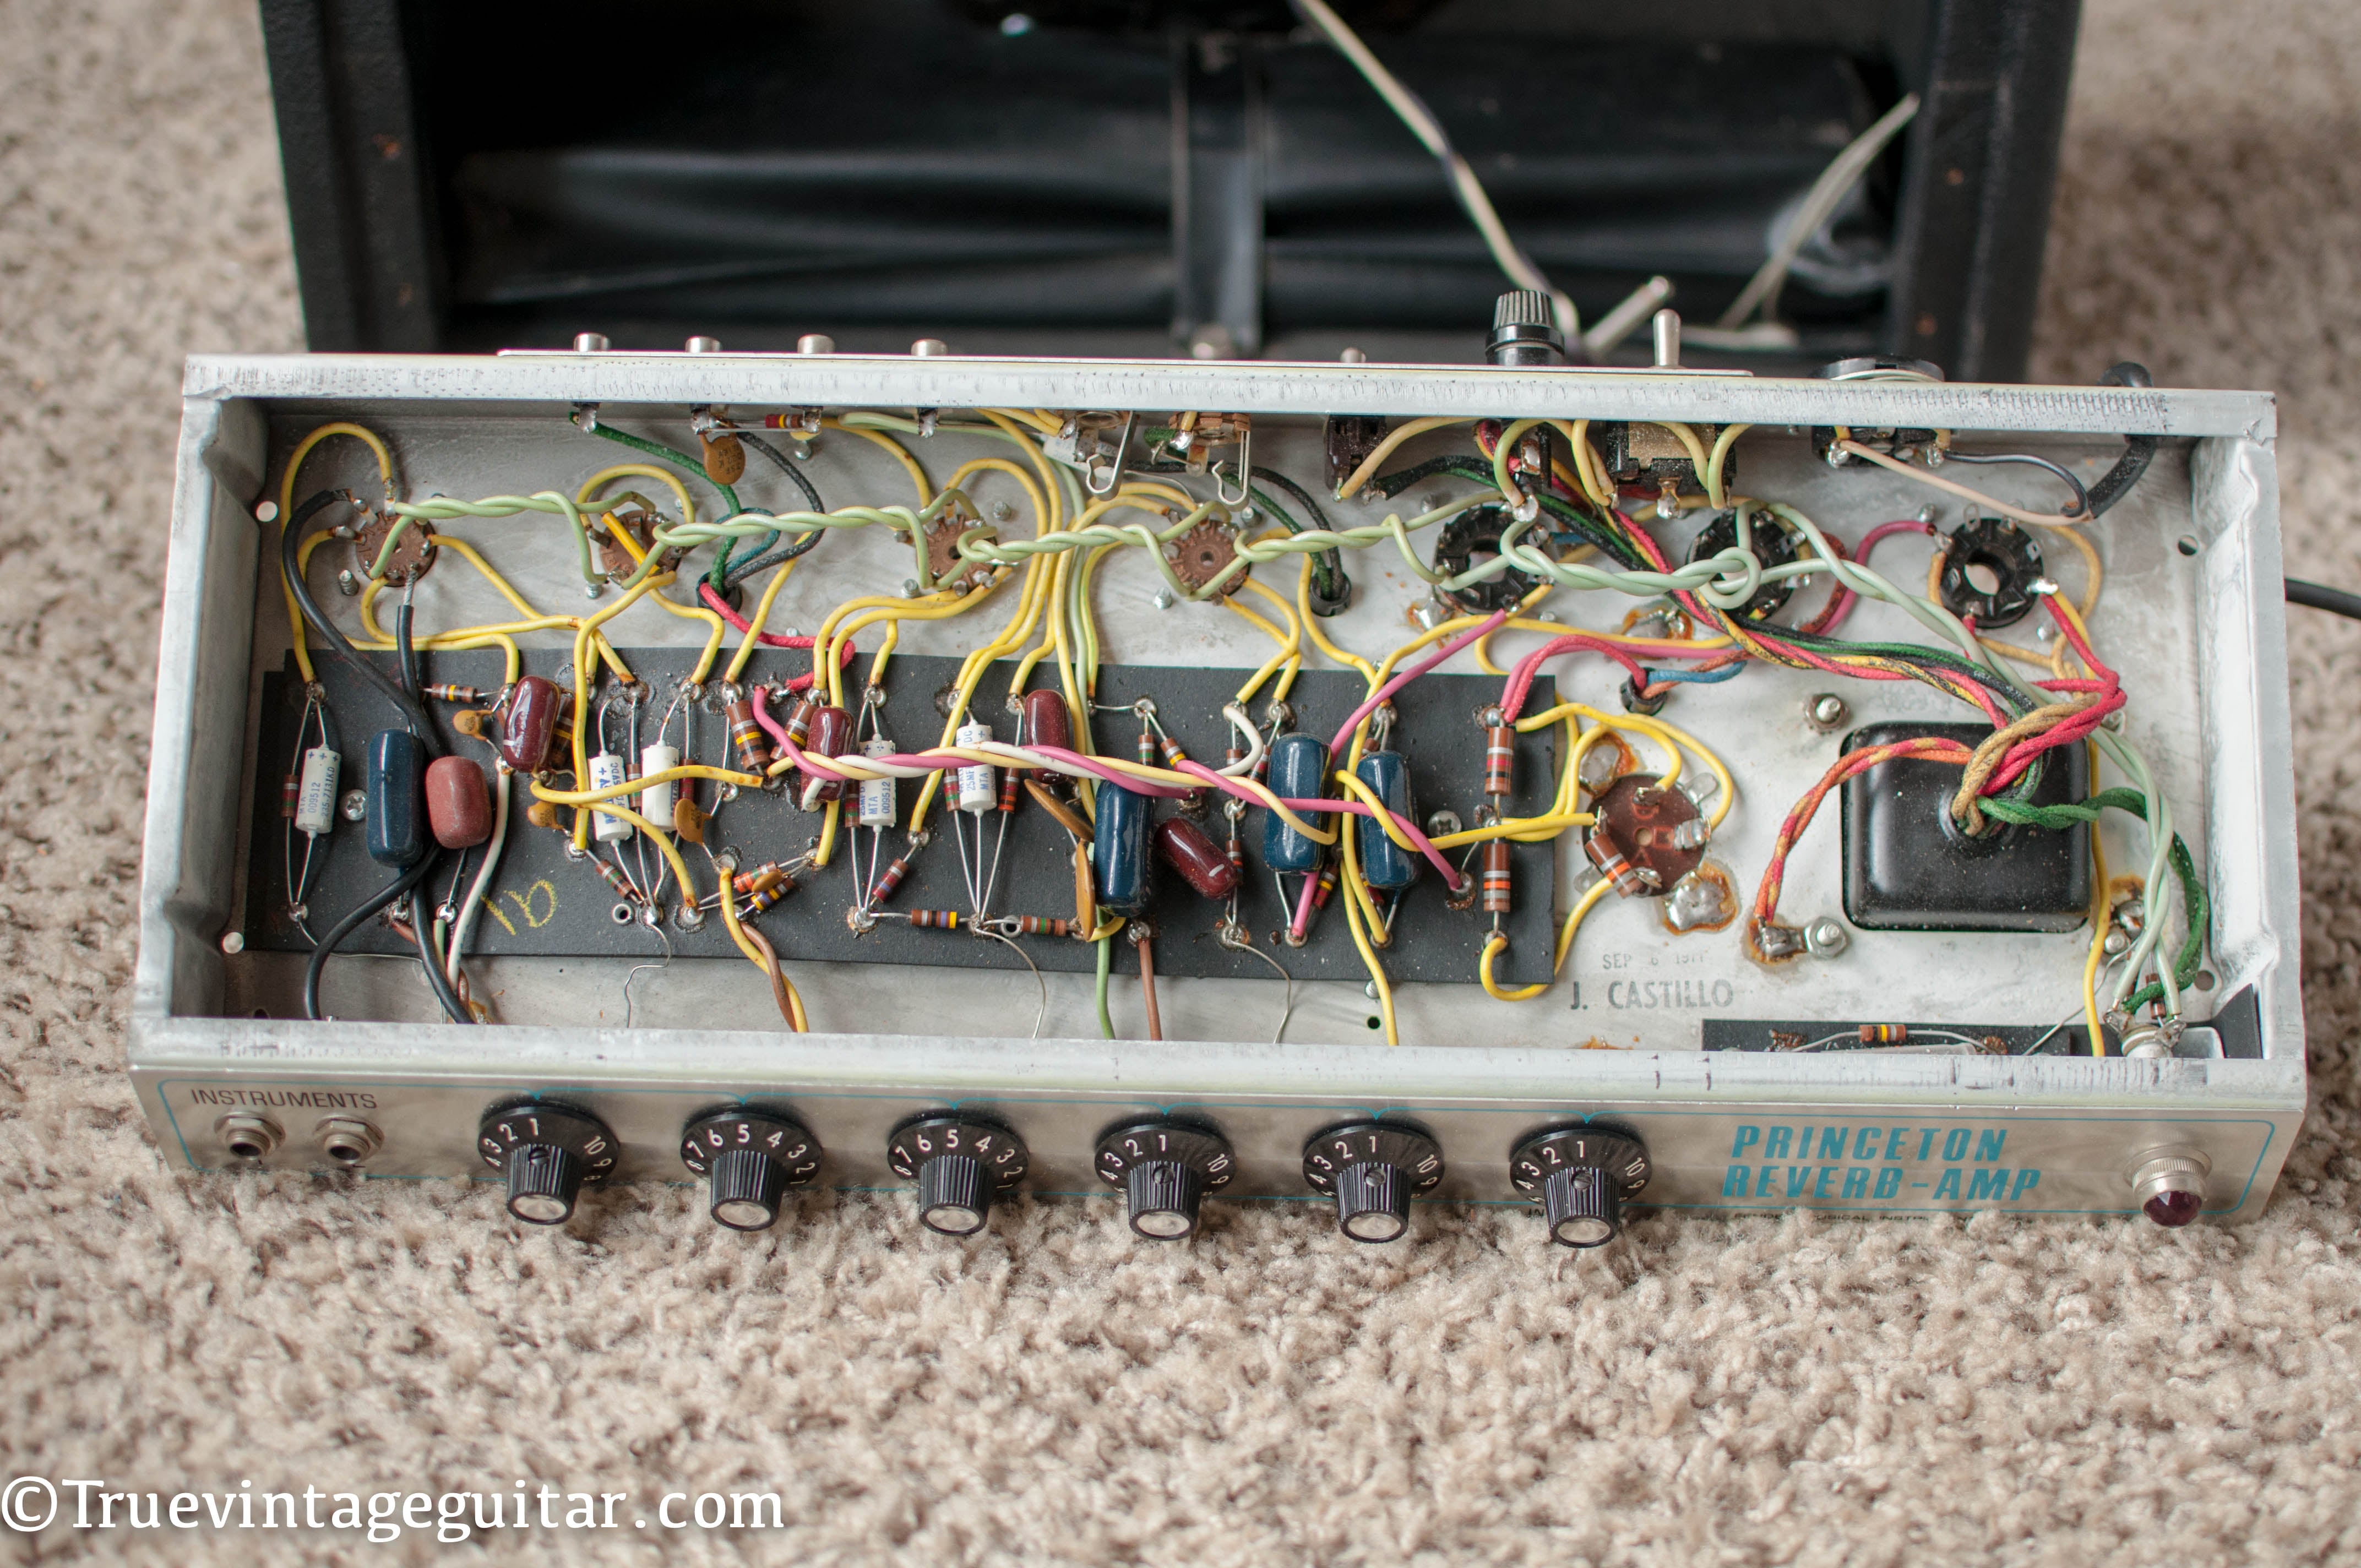 hand wired circuit board, chassis, 1971 Fender Princeton Reverb amp